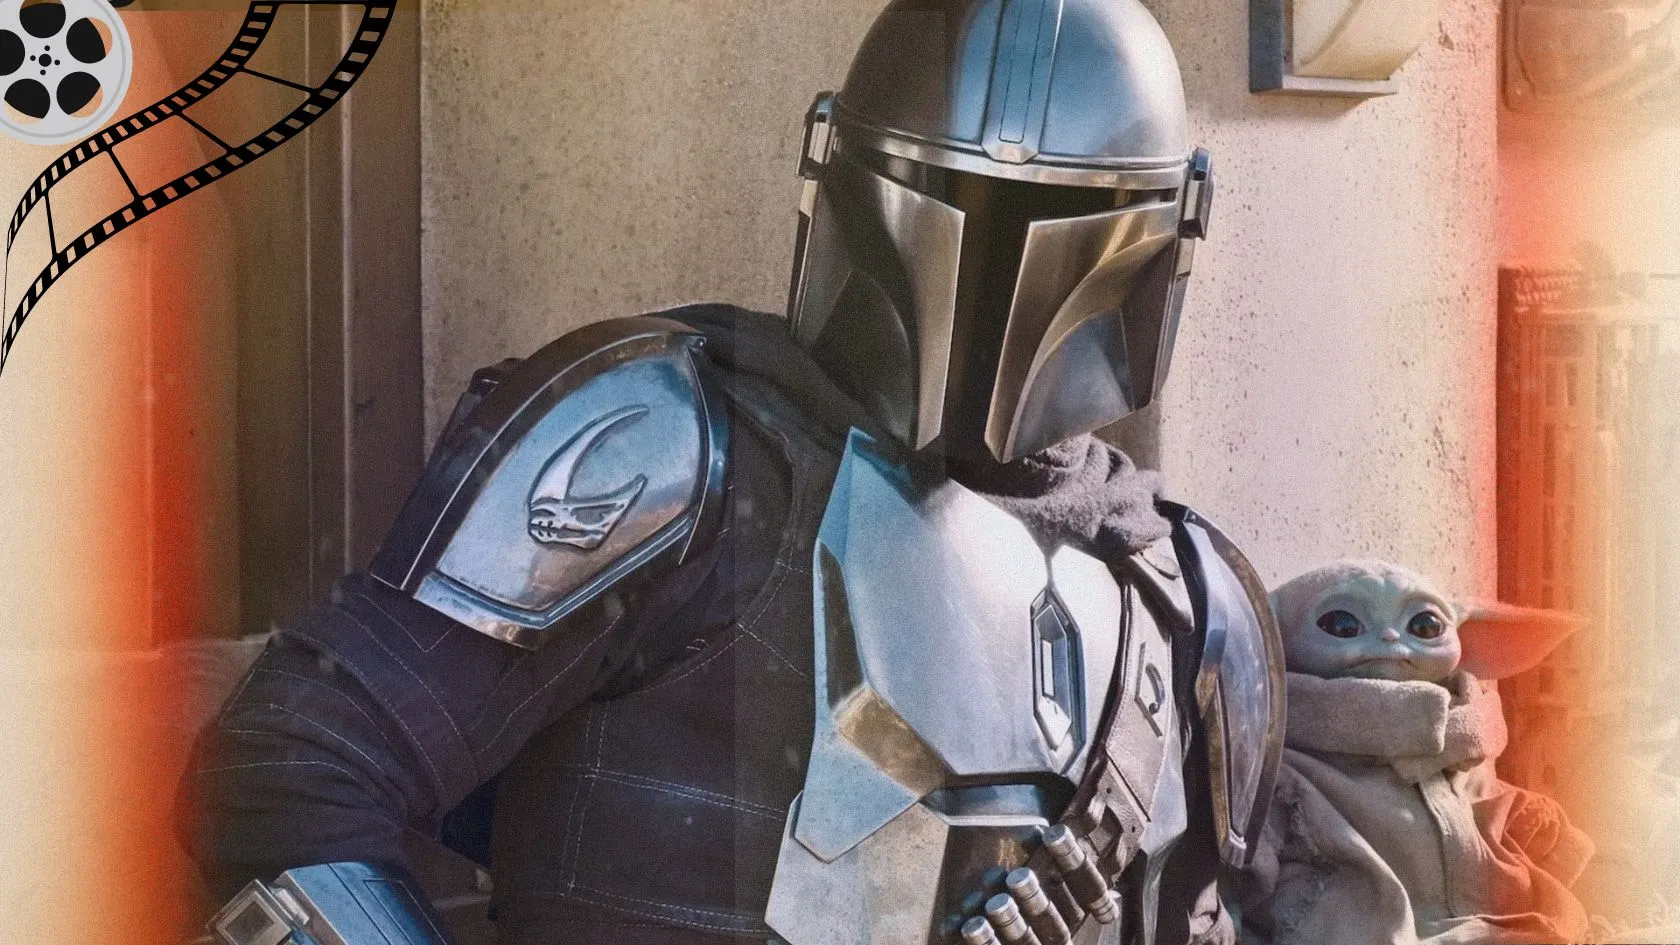 New Filming Details Revealed for The Mandalorian & Grogu Star Wars Movie